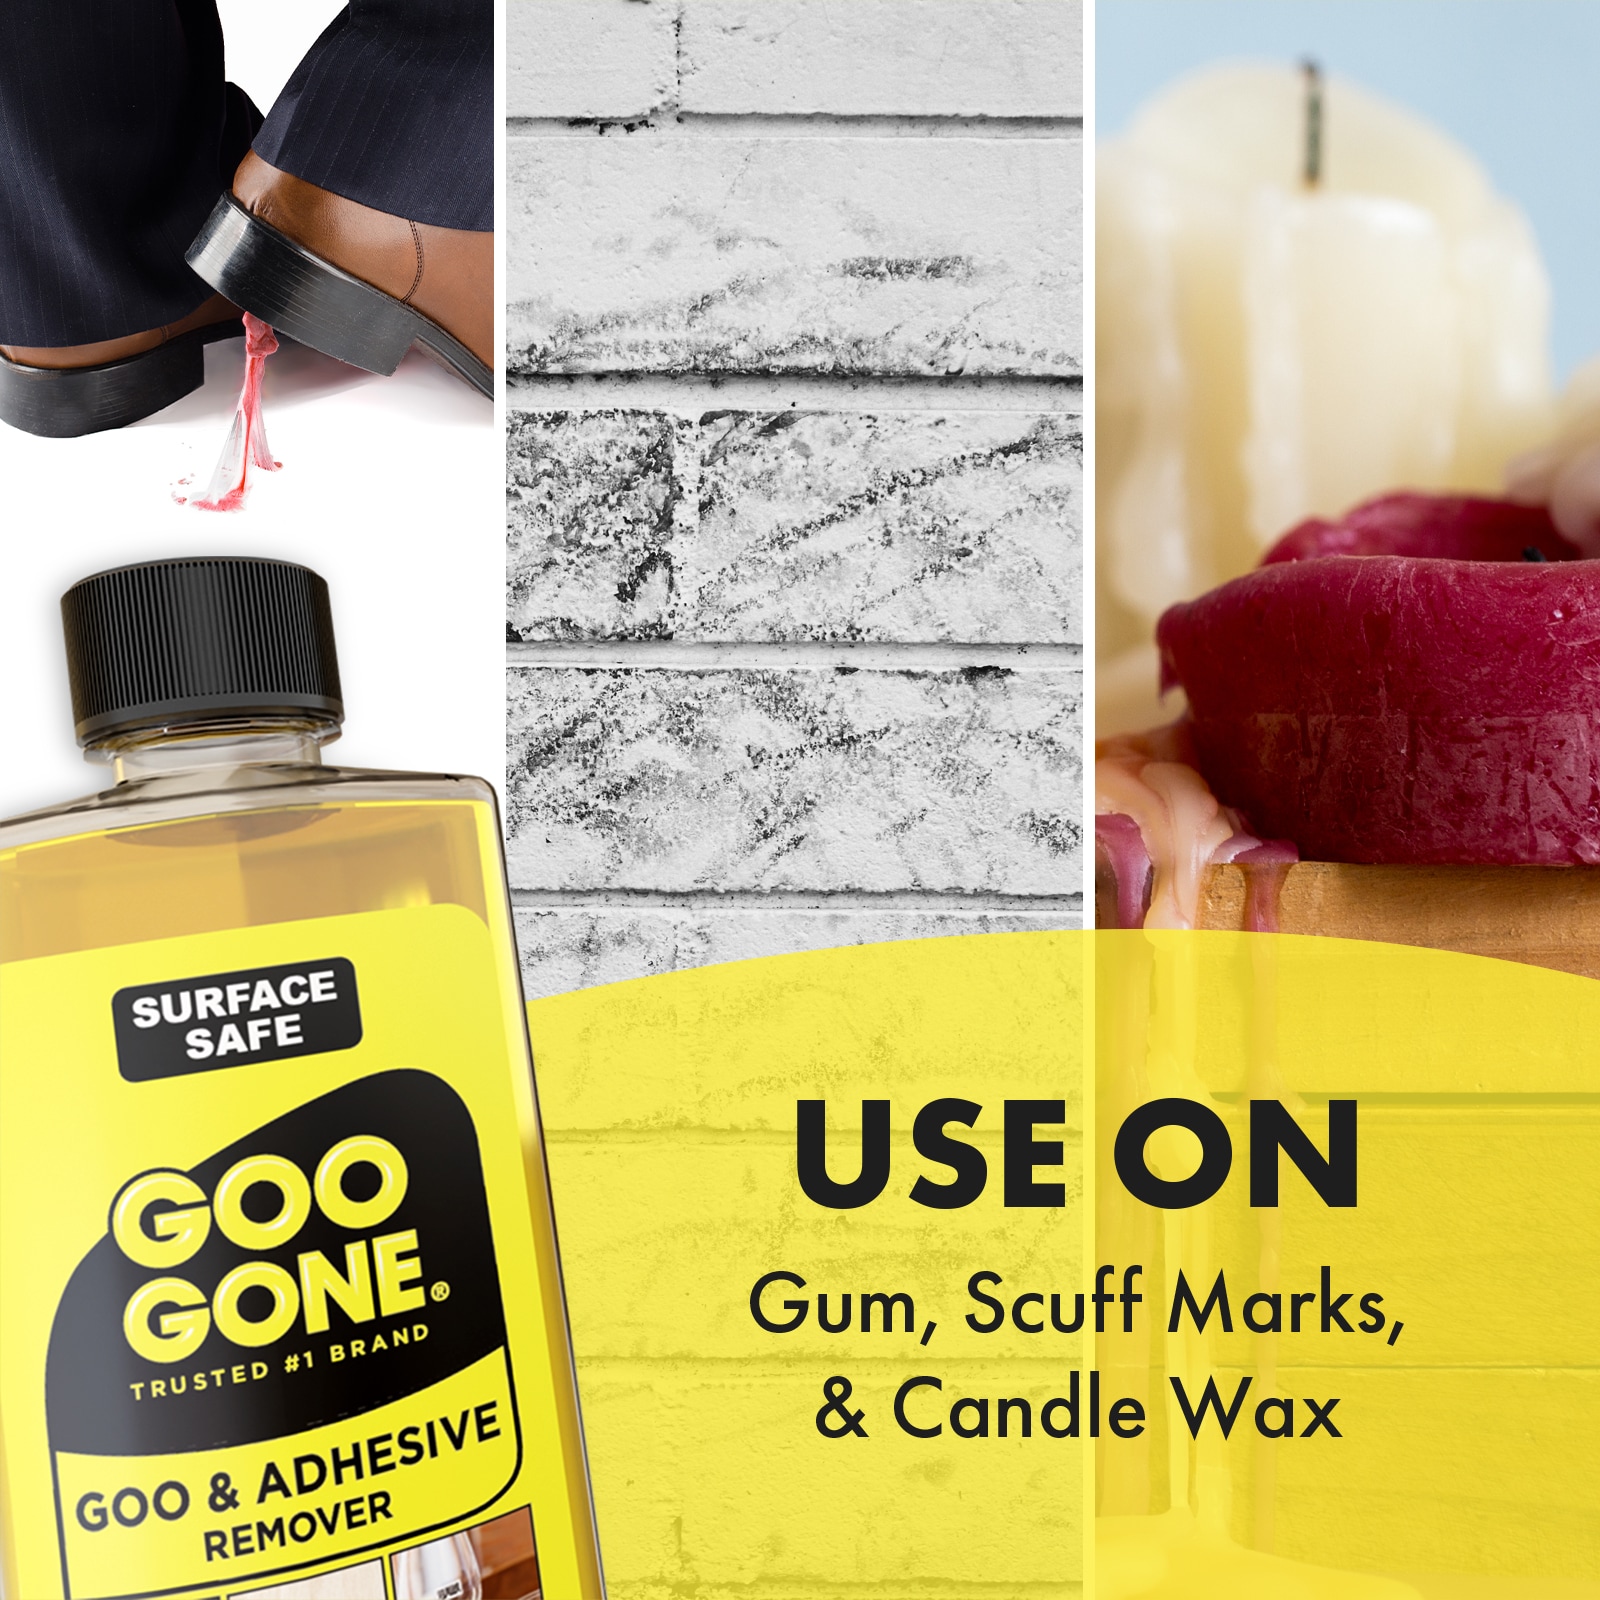 GOO GONE, Bottle, 8 oz Container Size, Citrus Adhesive Remover